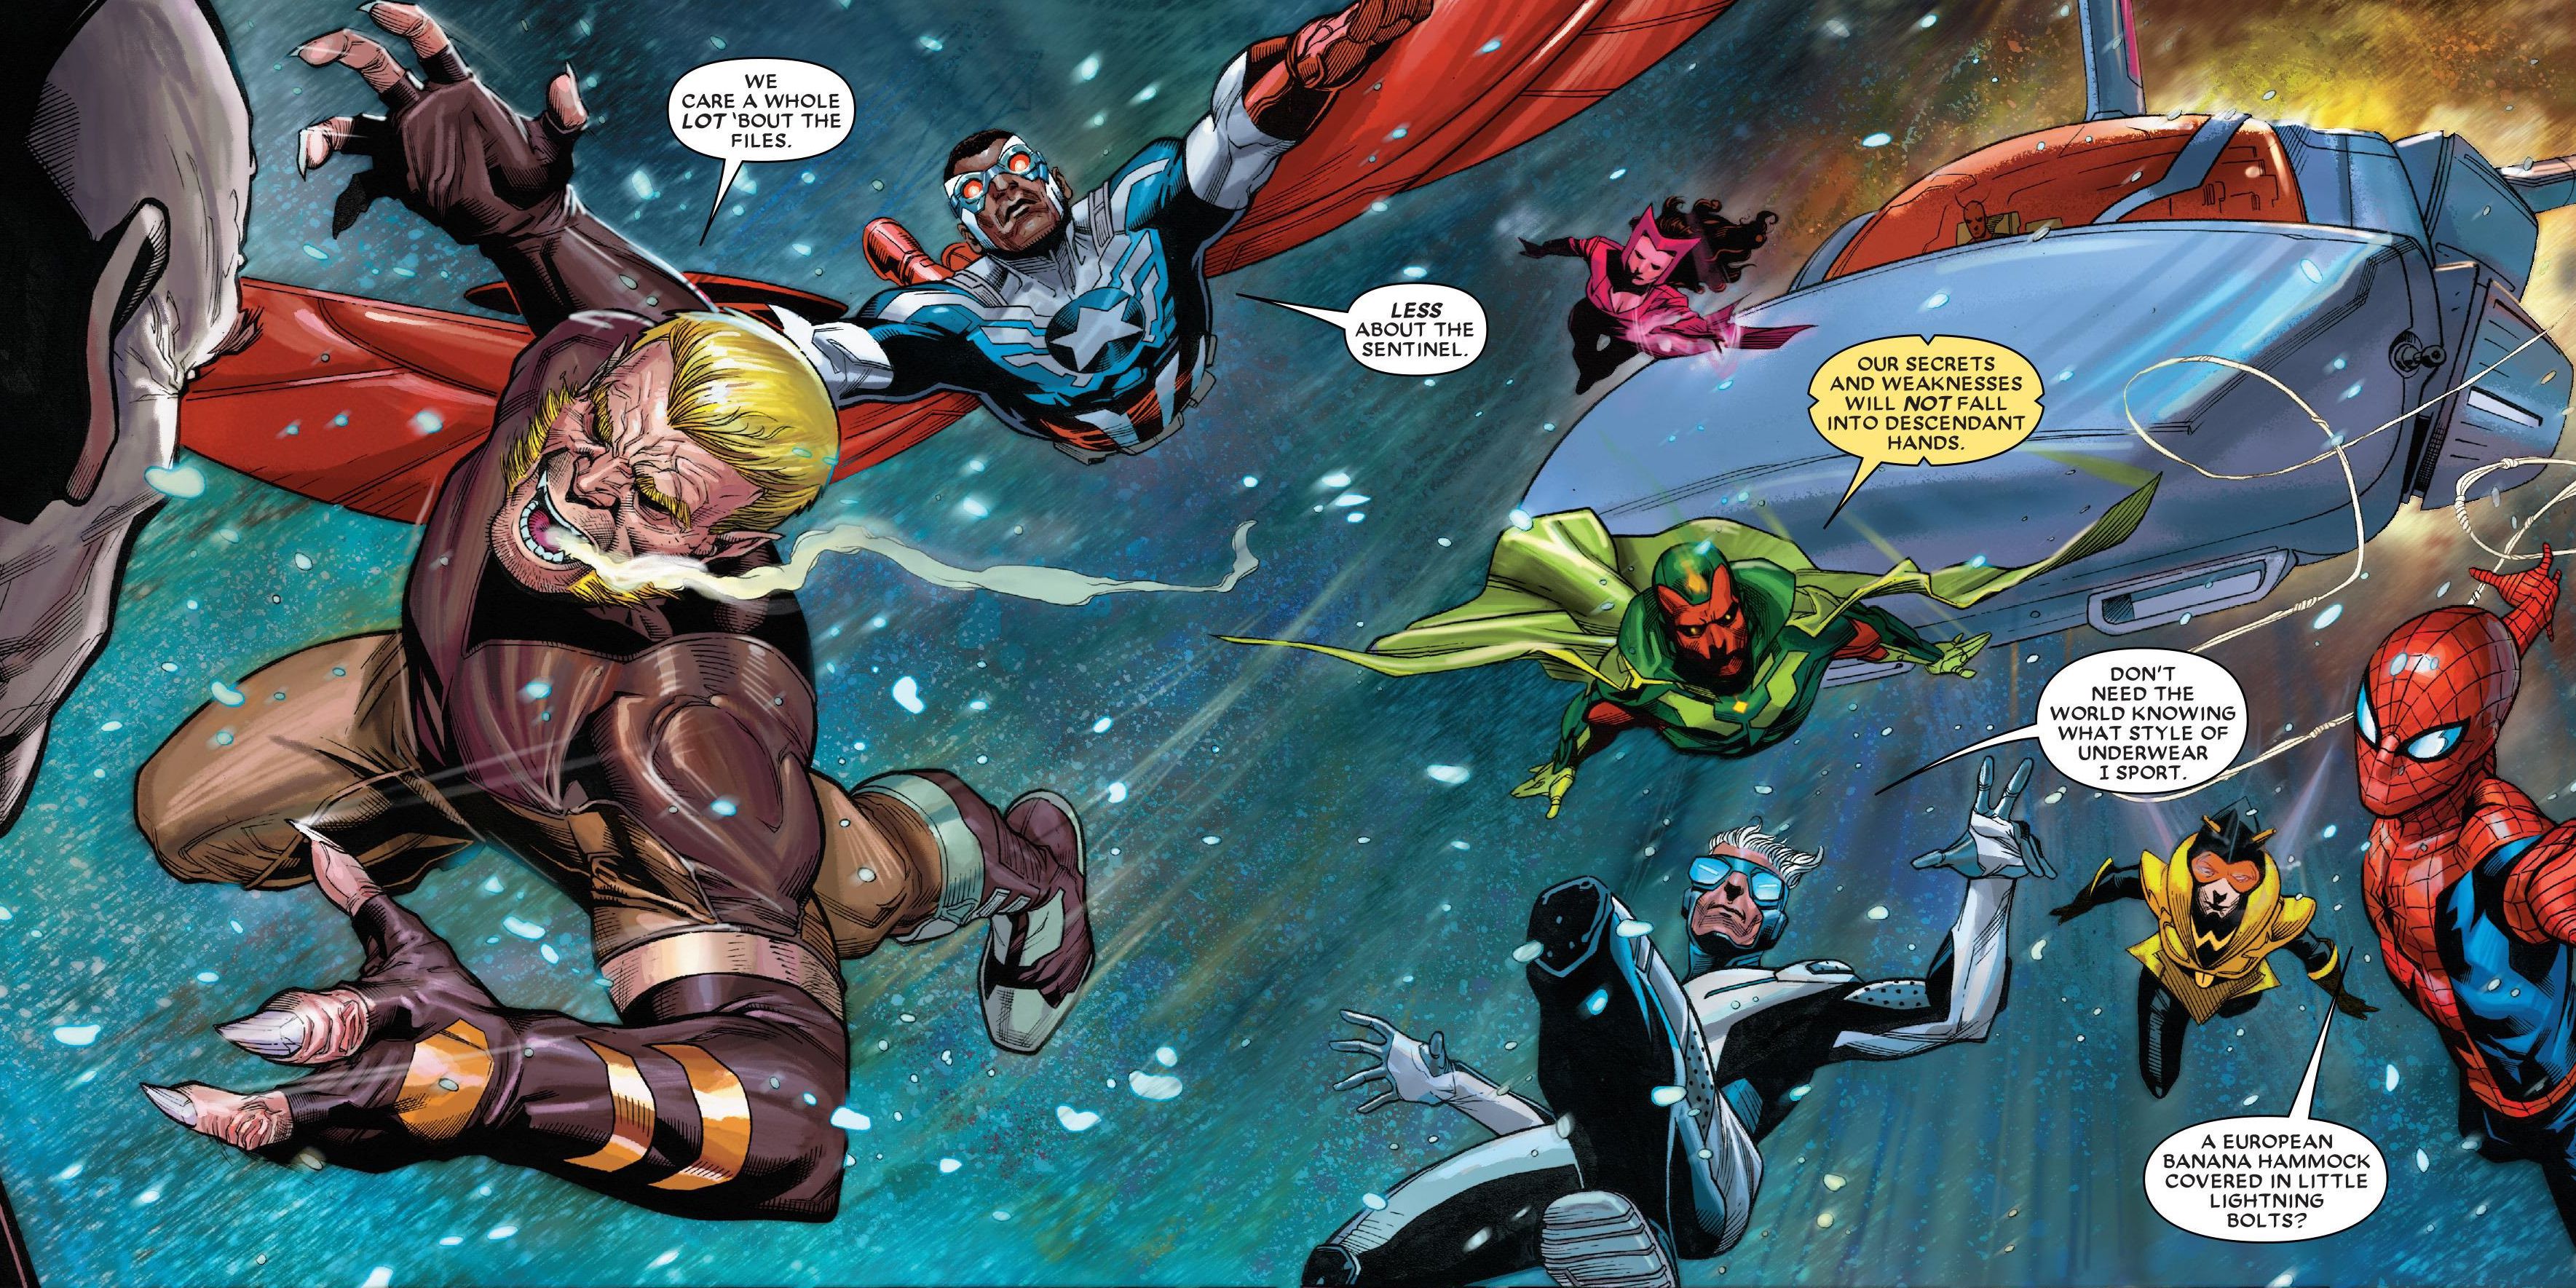 Sabretooth fights with the Avengers